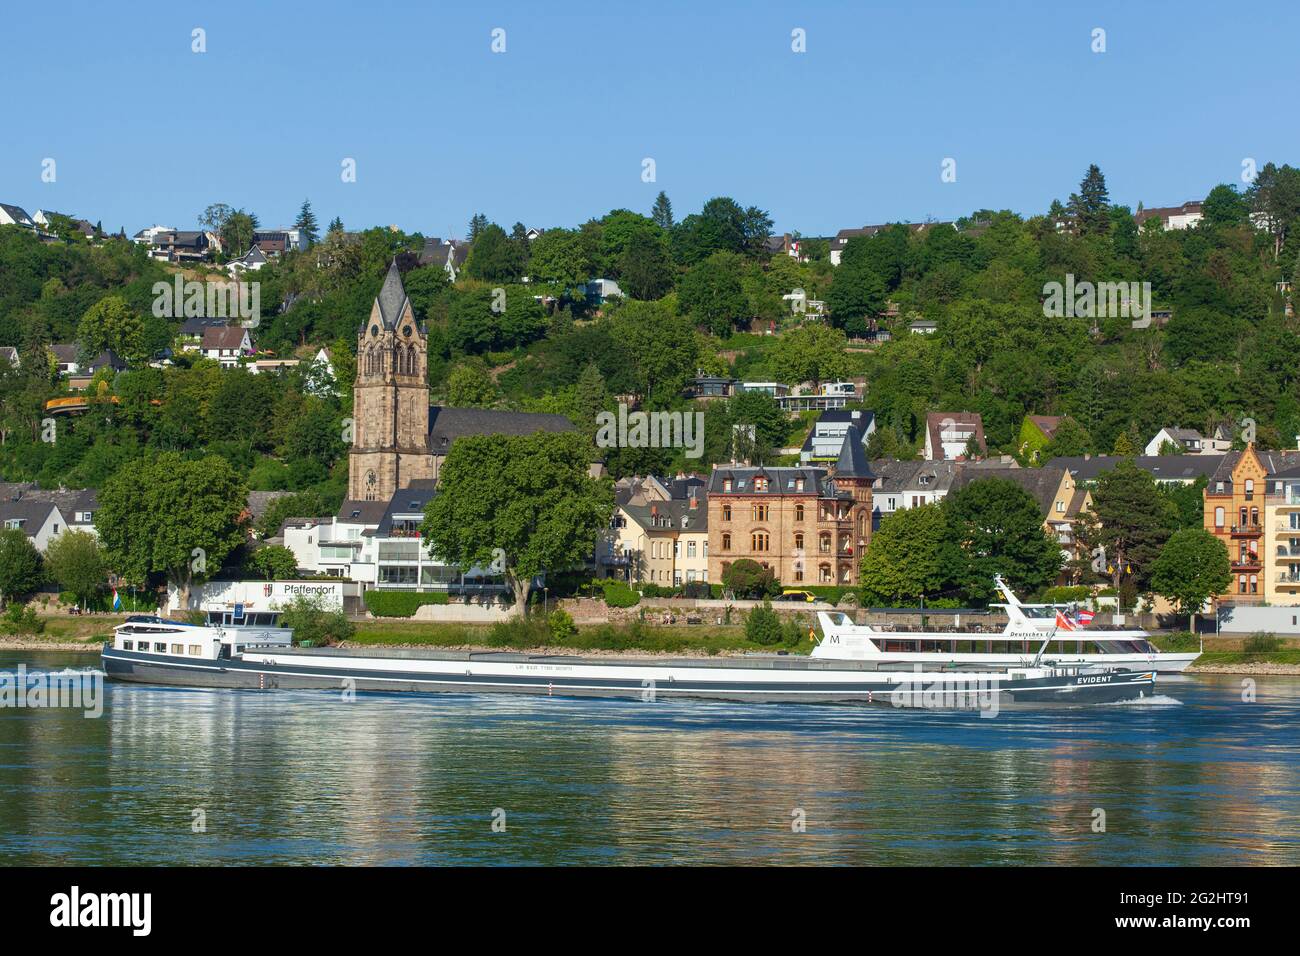 Parish Church of St. Peter and Paul and residential buildings in the Pfaffendorf district, Koblenz, Rhineland-Palatinate, Germany, Europe Stock Photo